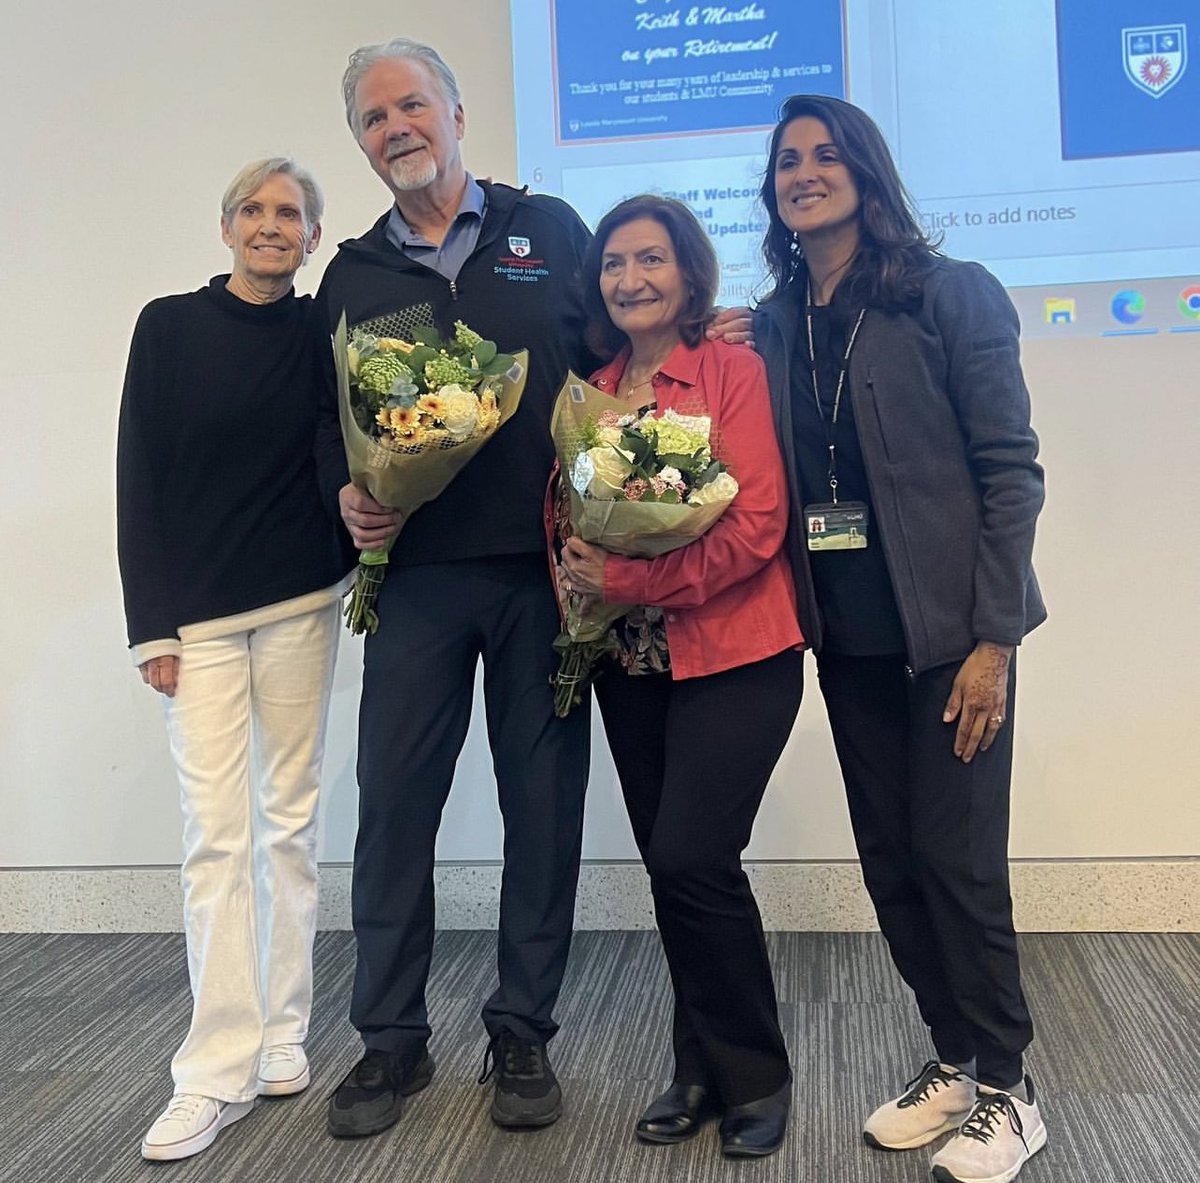 Congrats, to Keith and Martha on their retirement at the end of the semester. We are grateful for your years of service at LMU and to Student Health Services. I’m grateful for the opportunity to celebrate you both at our most recent divisional meeting!